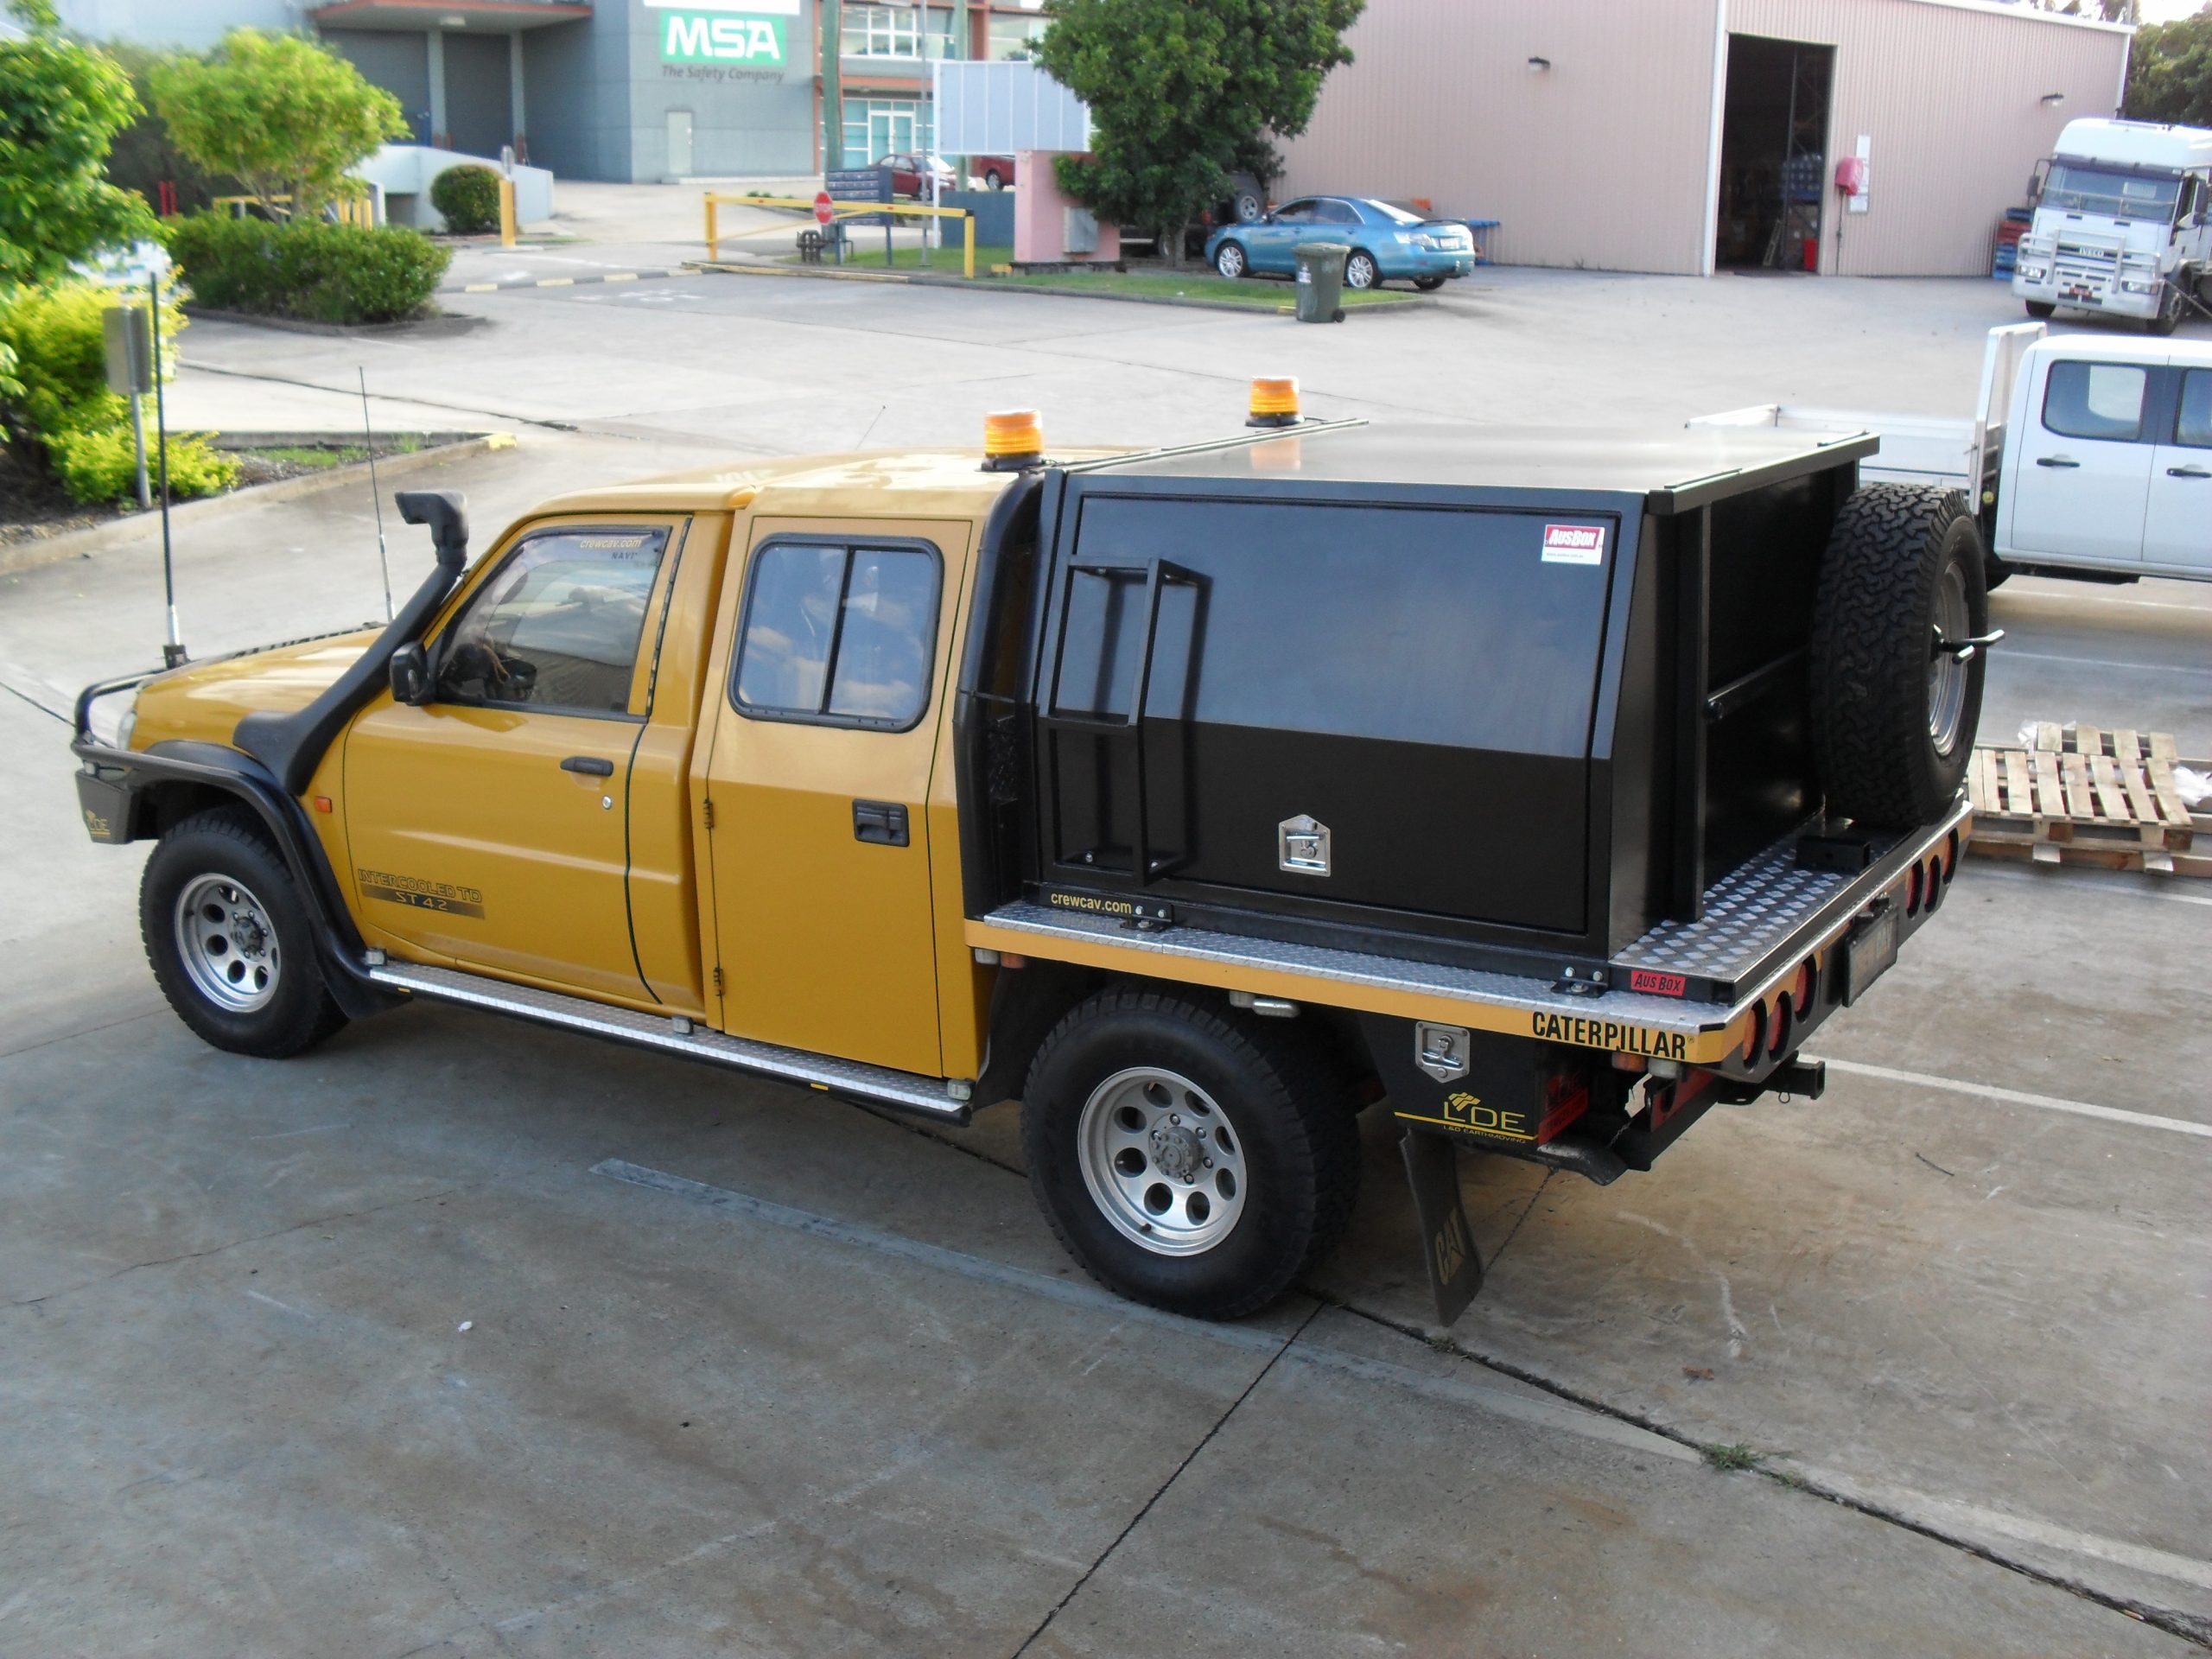 Customising your ute for pest control, mining, or builders